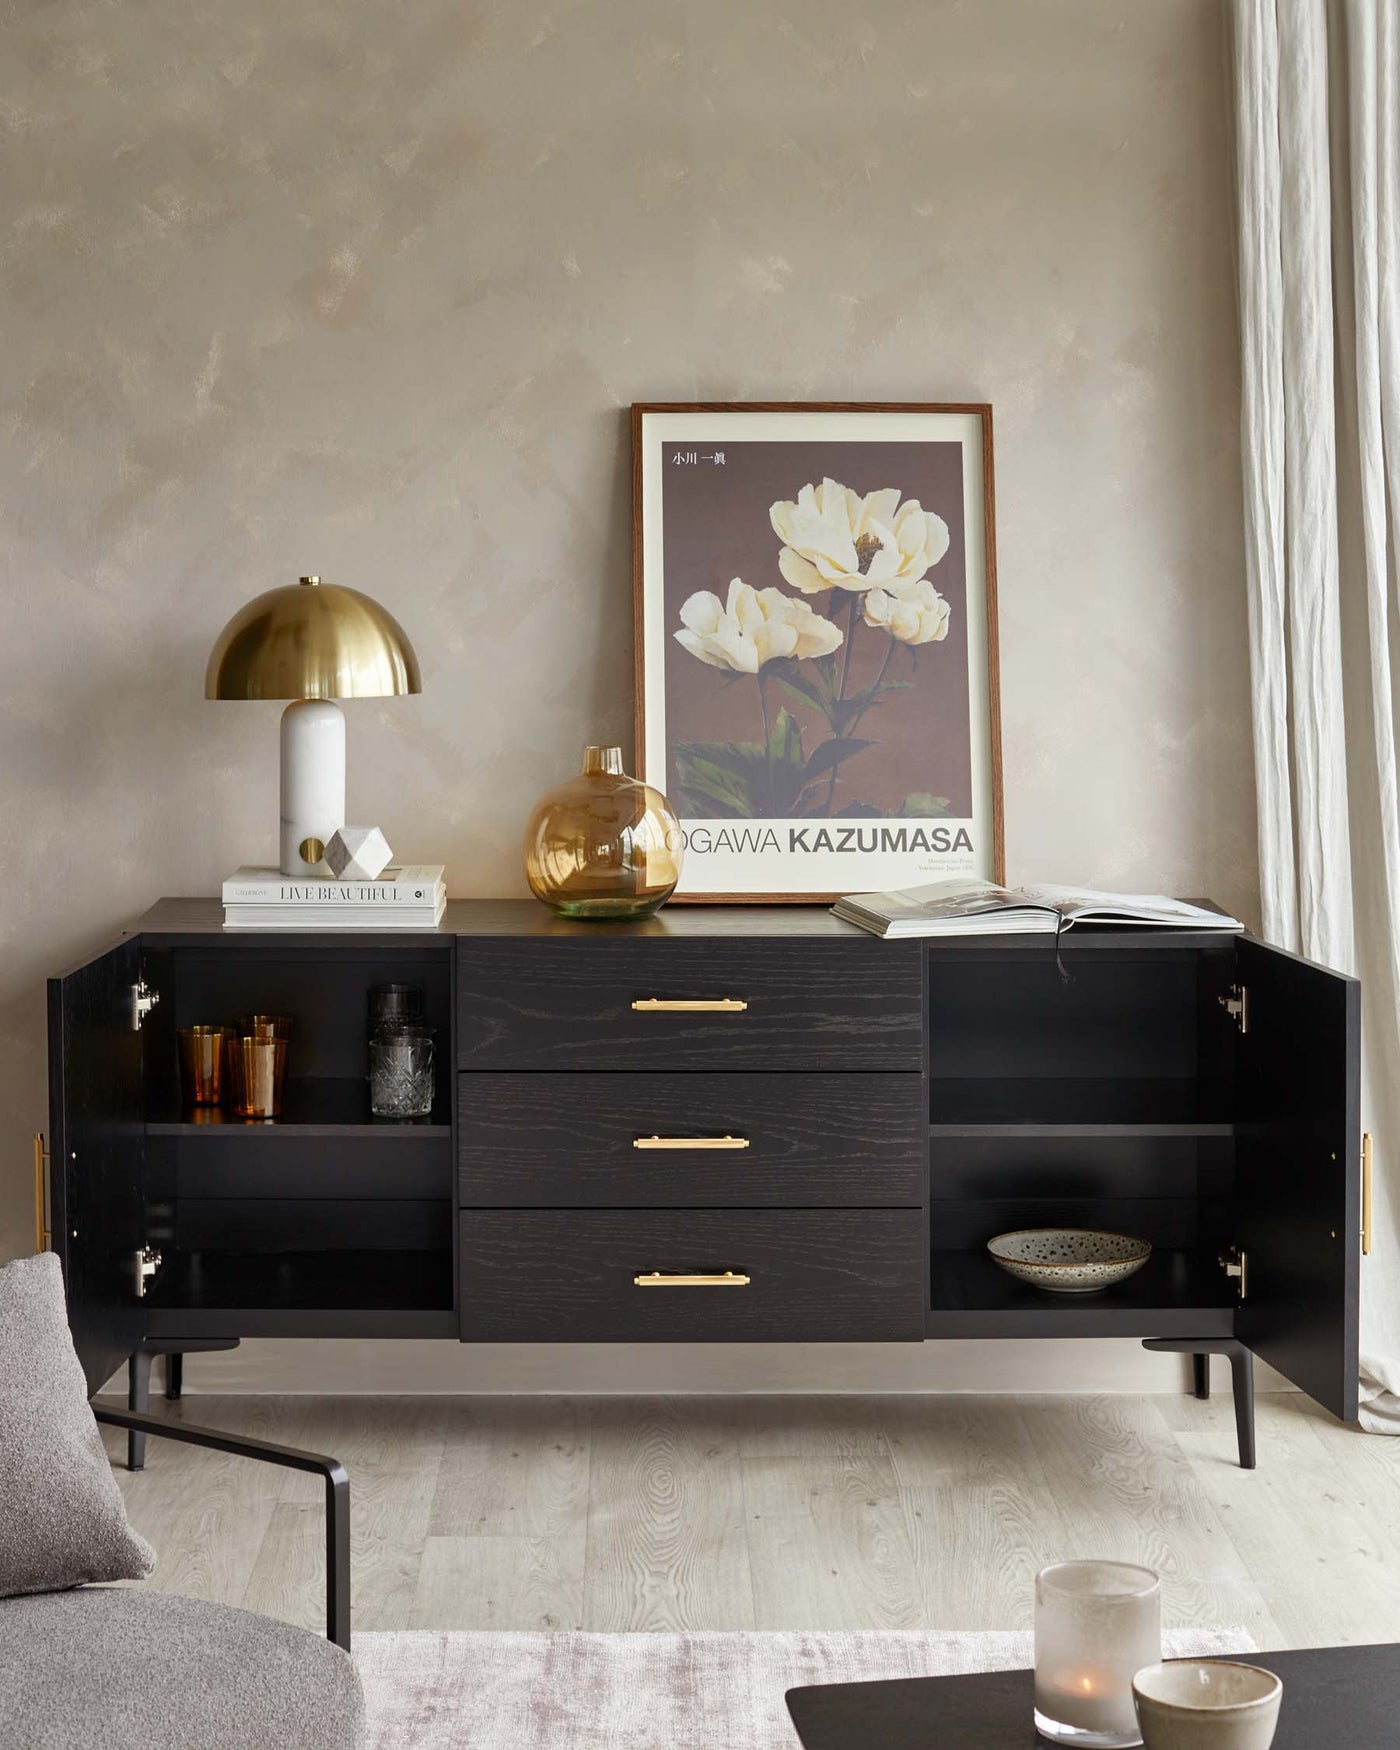 Modern black wooden sideboard with gold handles, featuring two closed cabinets and three drawers, styled with decorative items on top, against a textured wall.